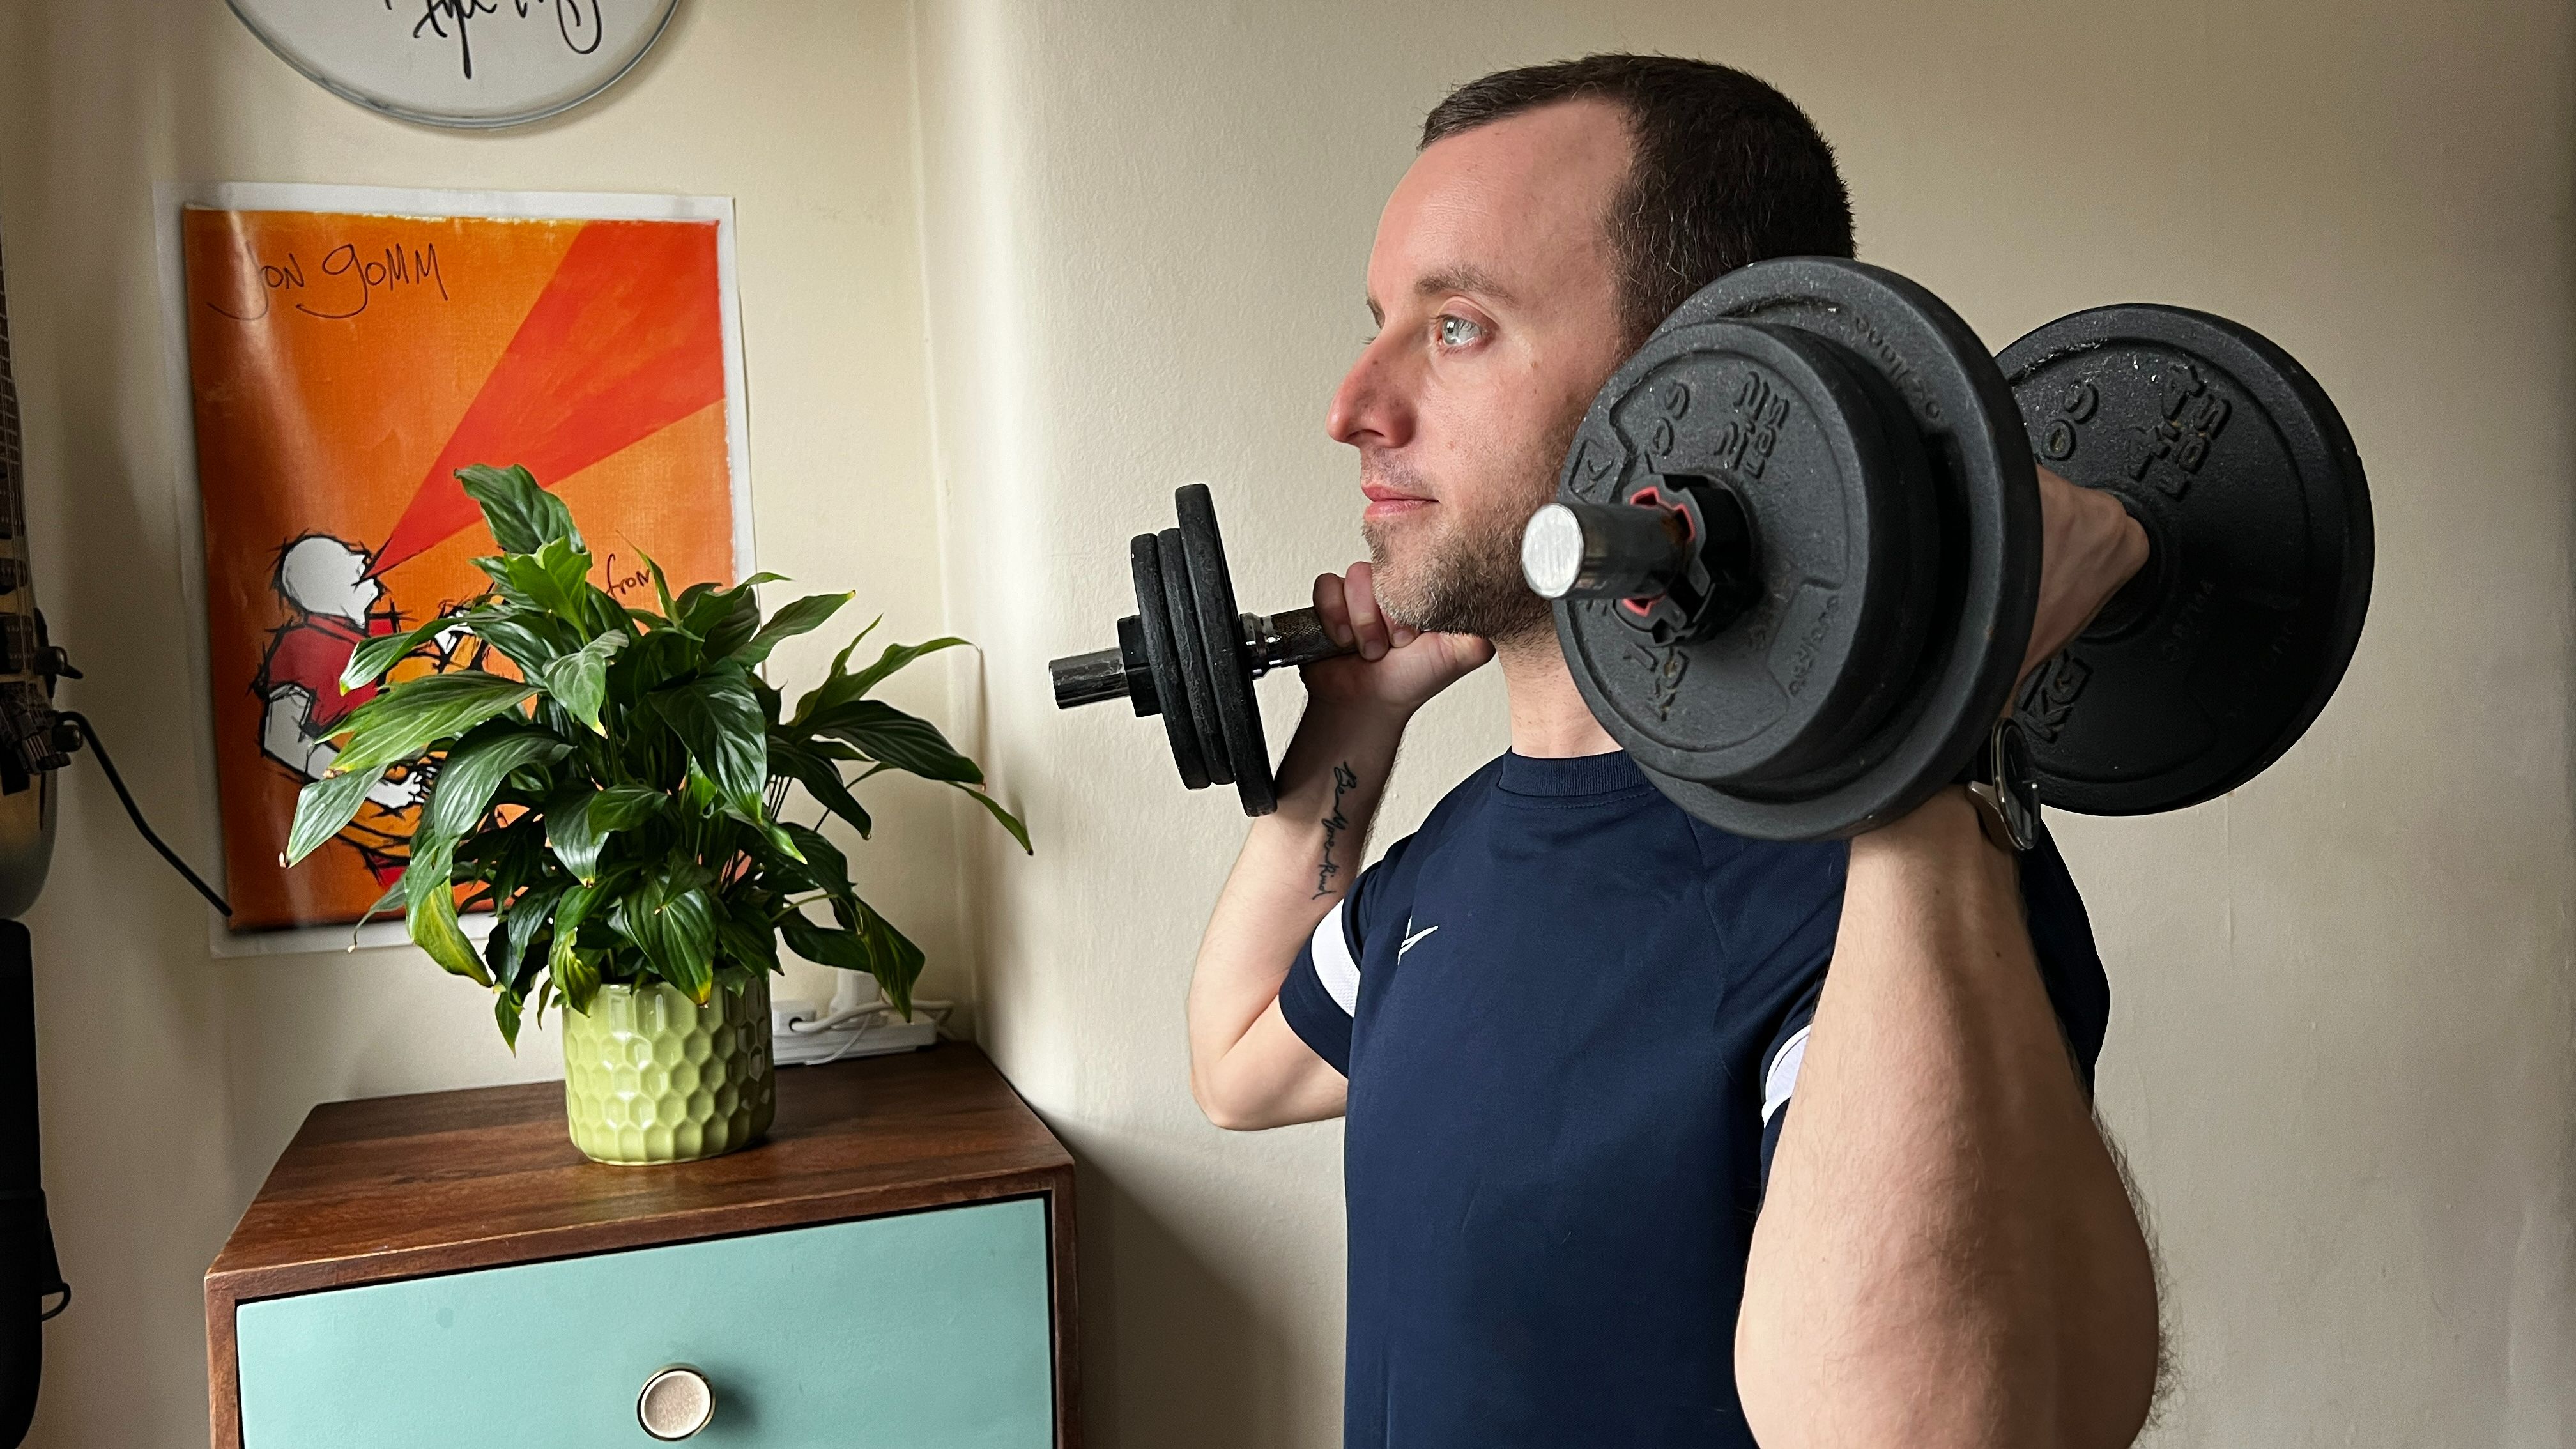 I tried this 8-move full-body dumbbell workout, and I…